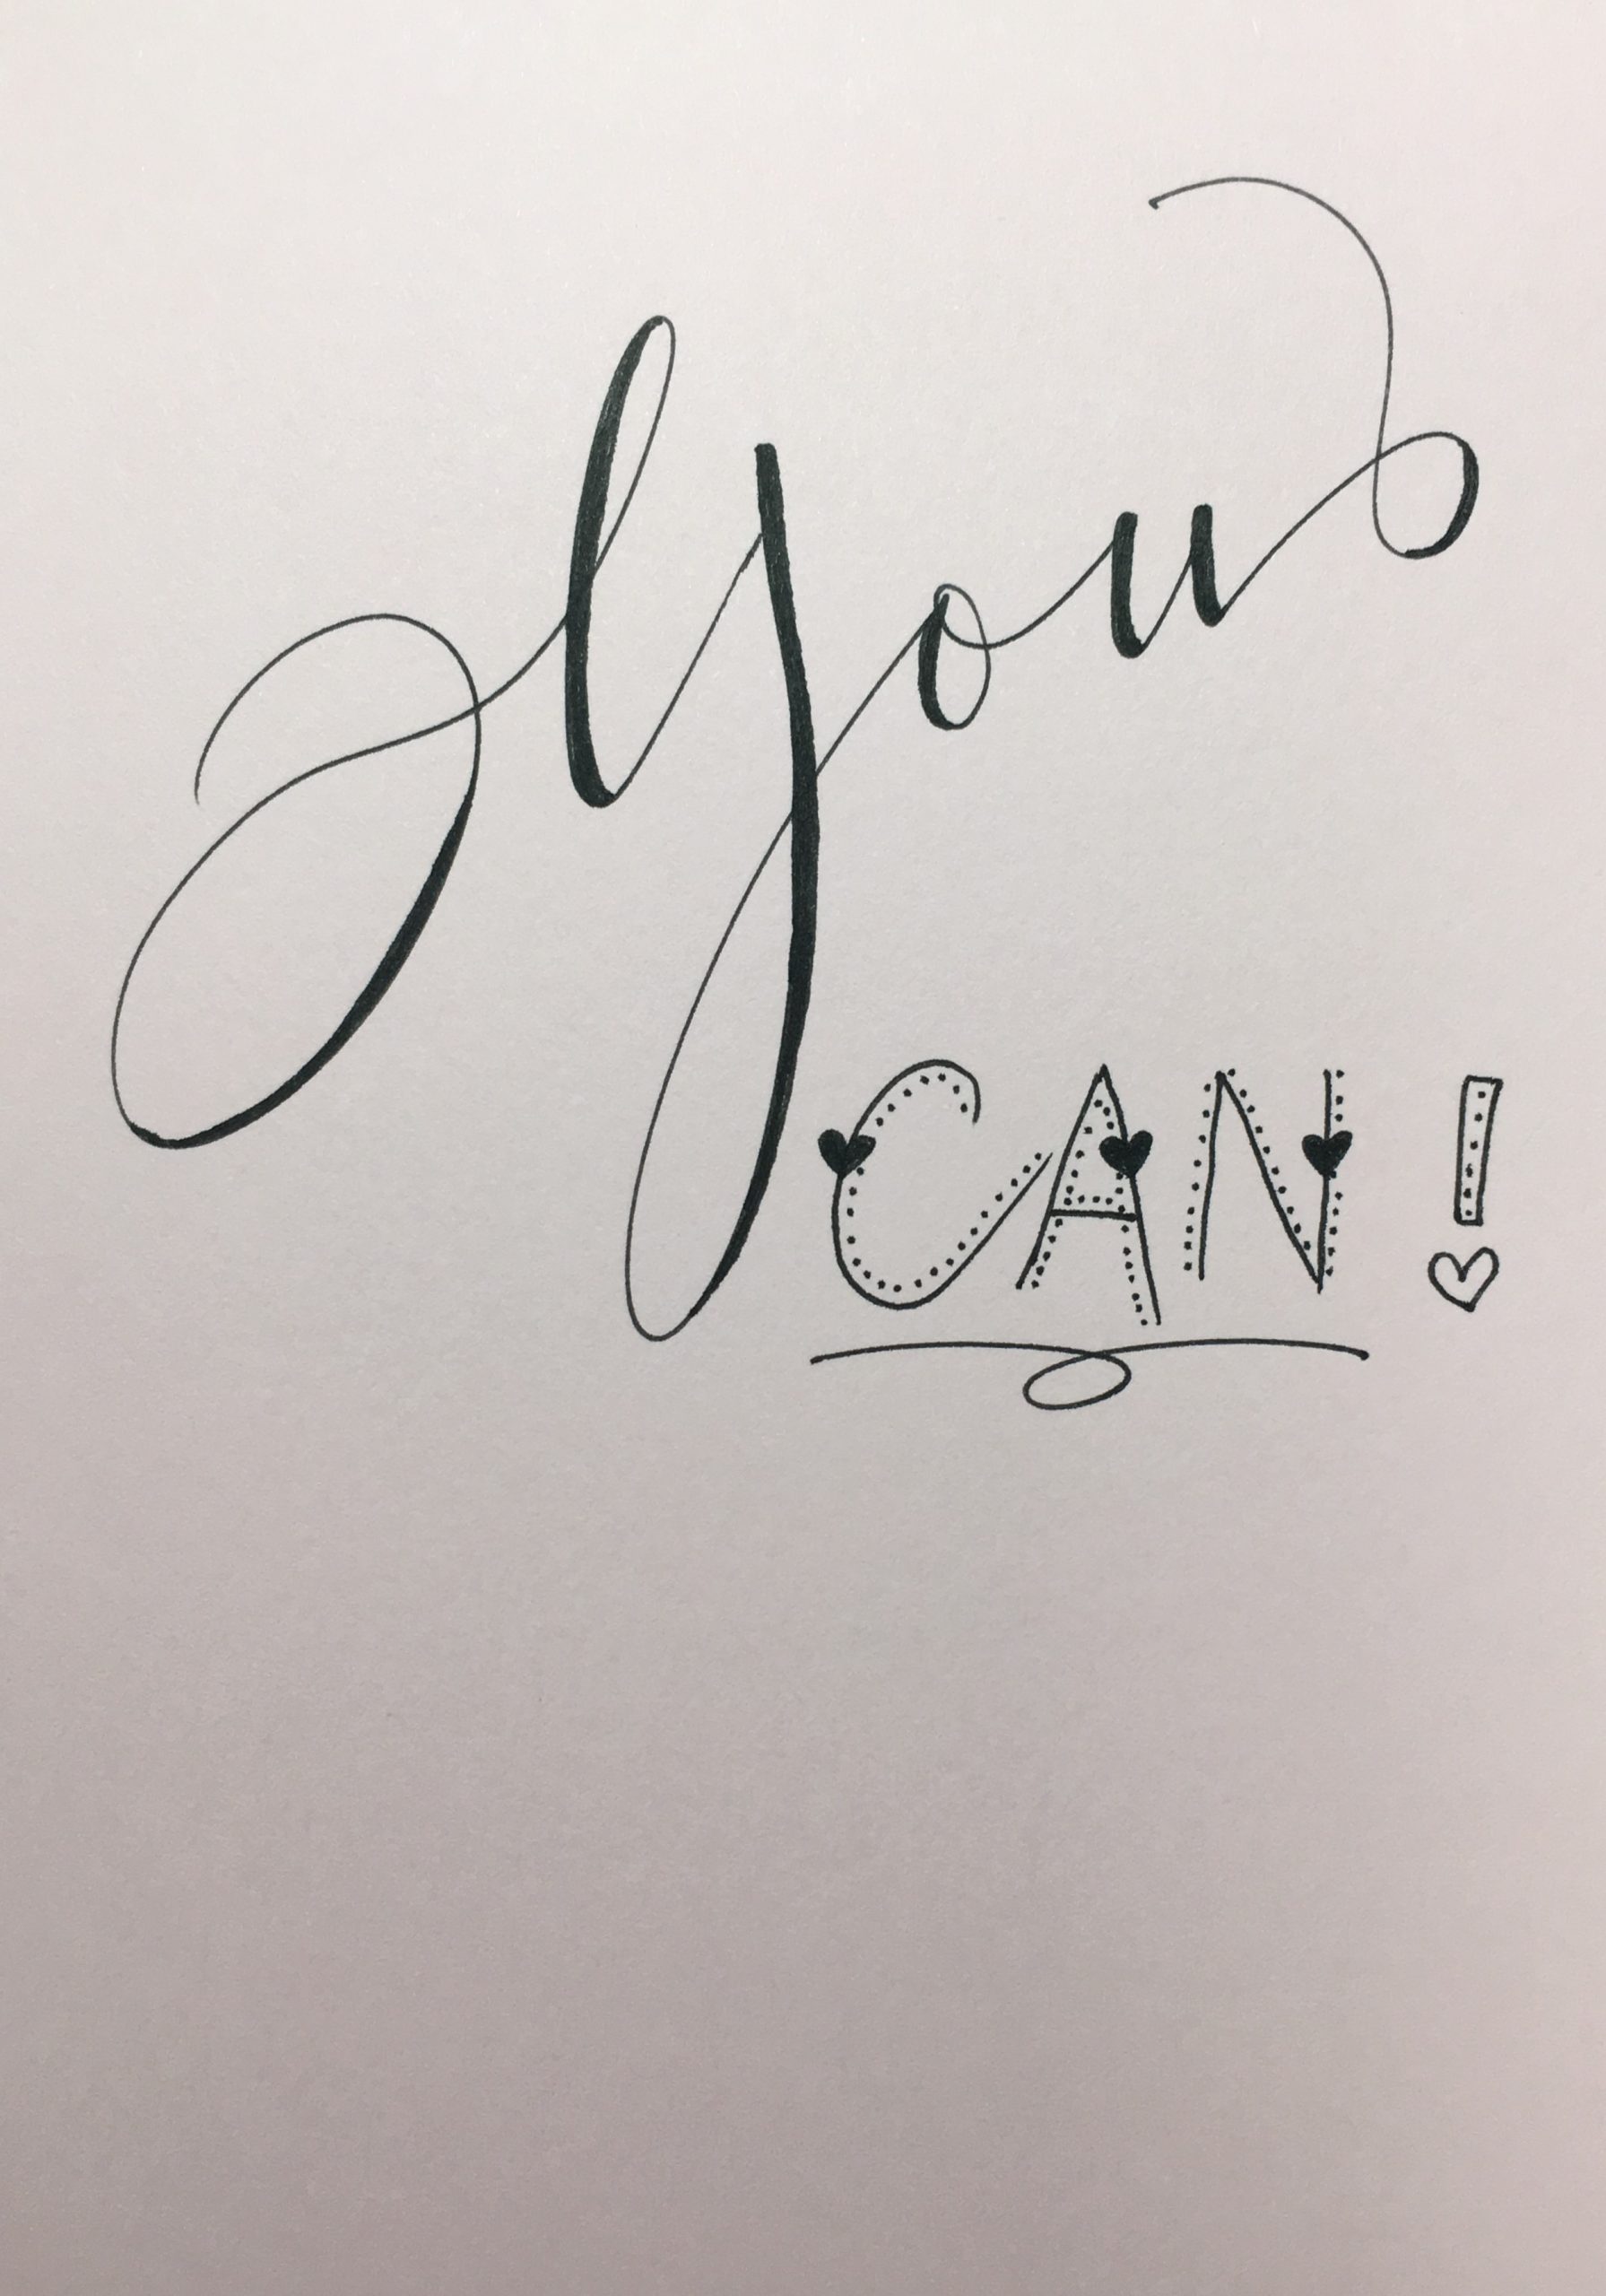 You Can!